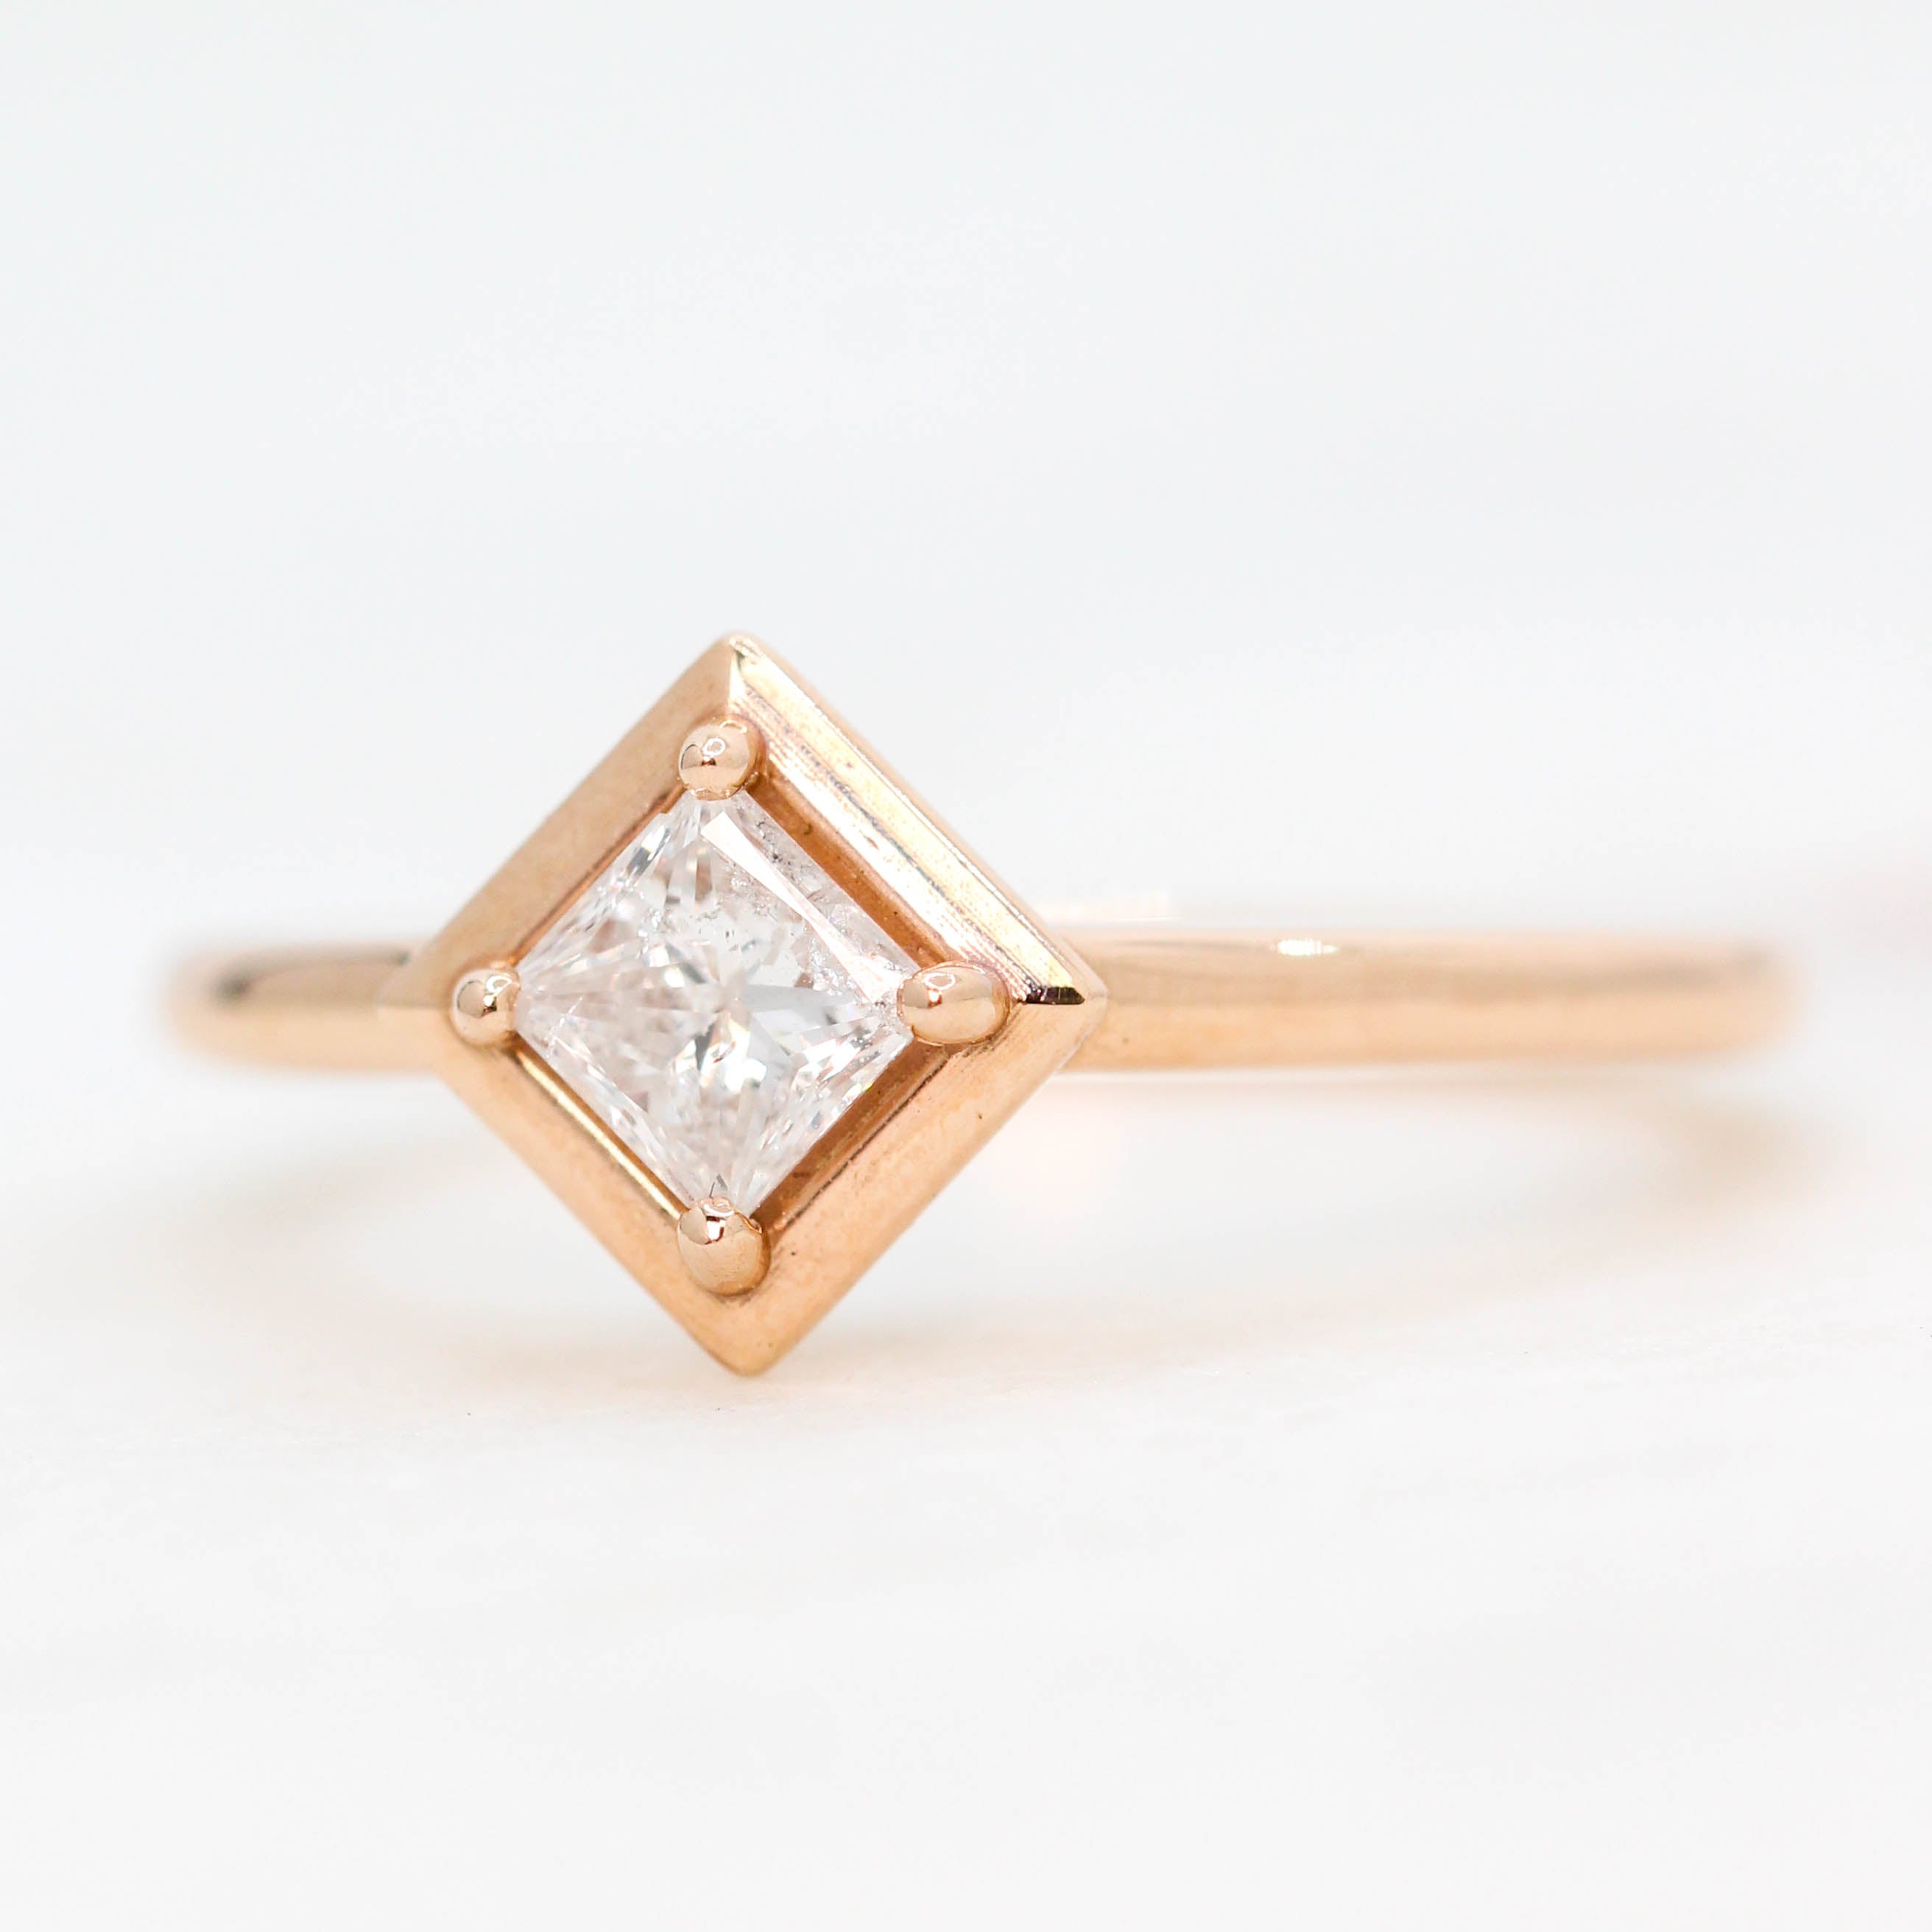 Rosemary Solitaire Ring with .40ct princess cut Diamond - 14k rose gold - Ready to Size and Ship - Midwinter Co. Alternative Bridal Rings and Modern Fine Jewelry